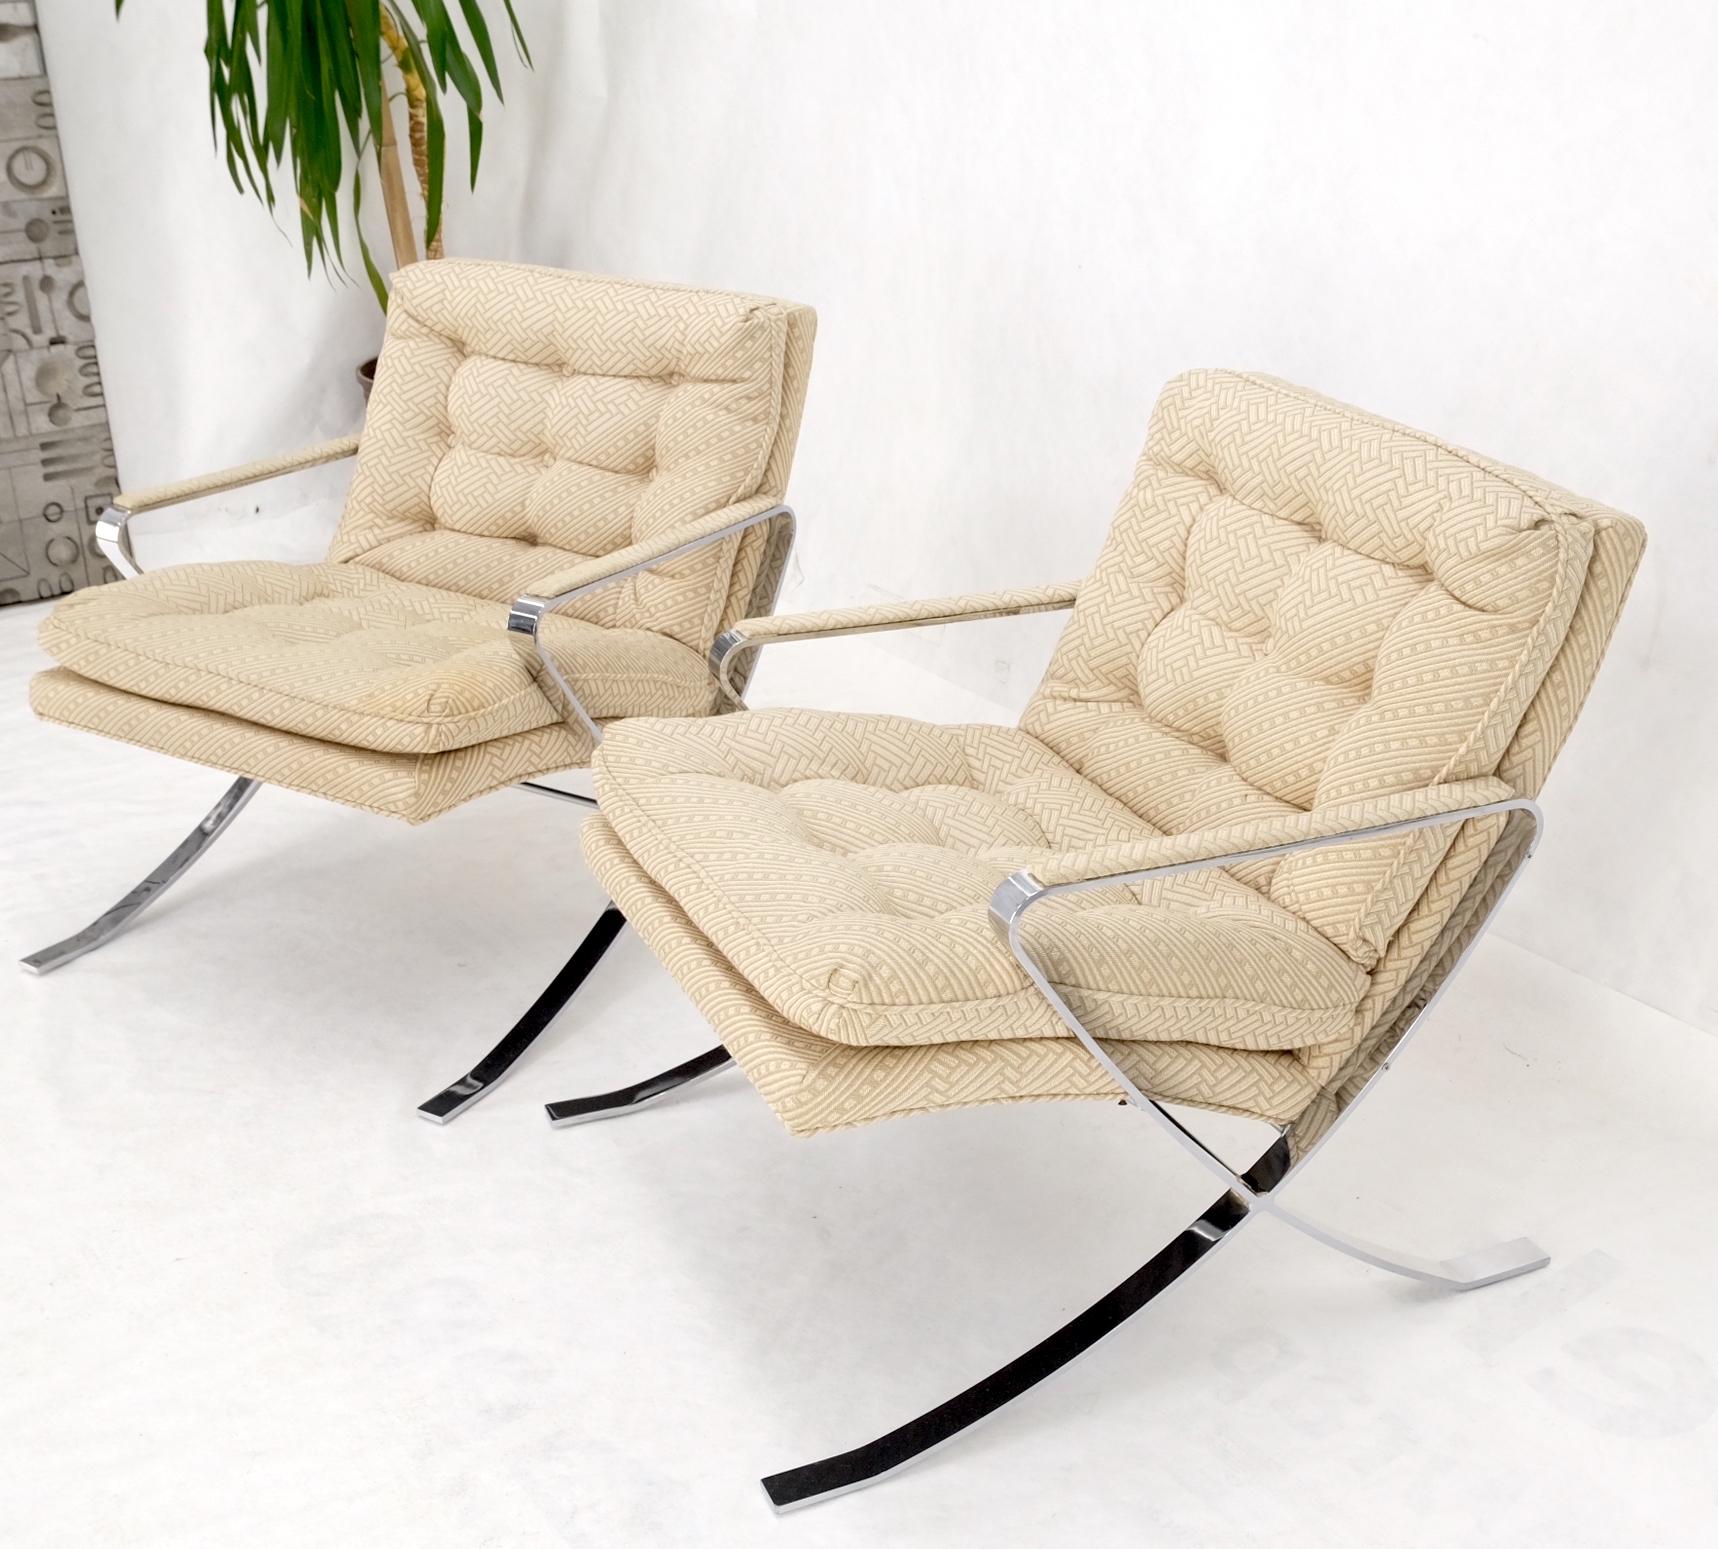 Pair of Mid-Century Modern Polished Stainless Steel Bauhaus Arm Lounge Chairs For Sale 6